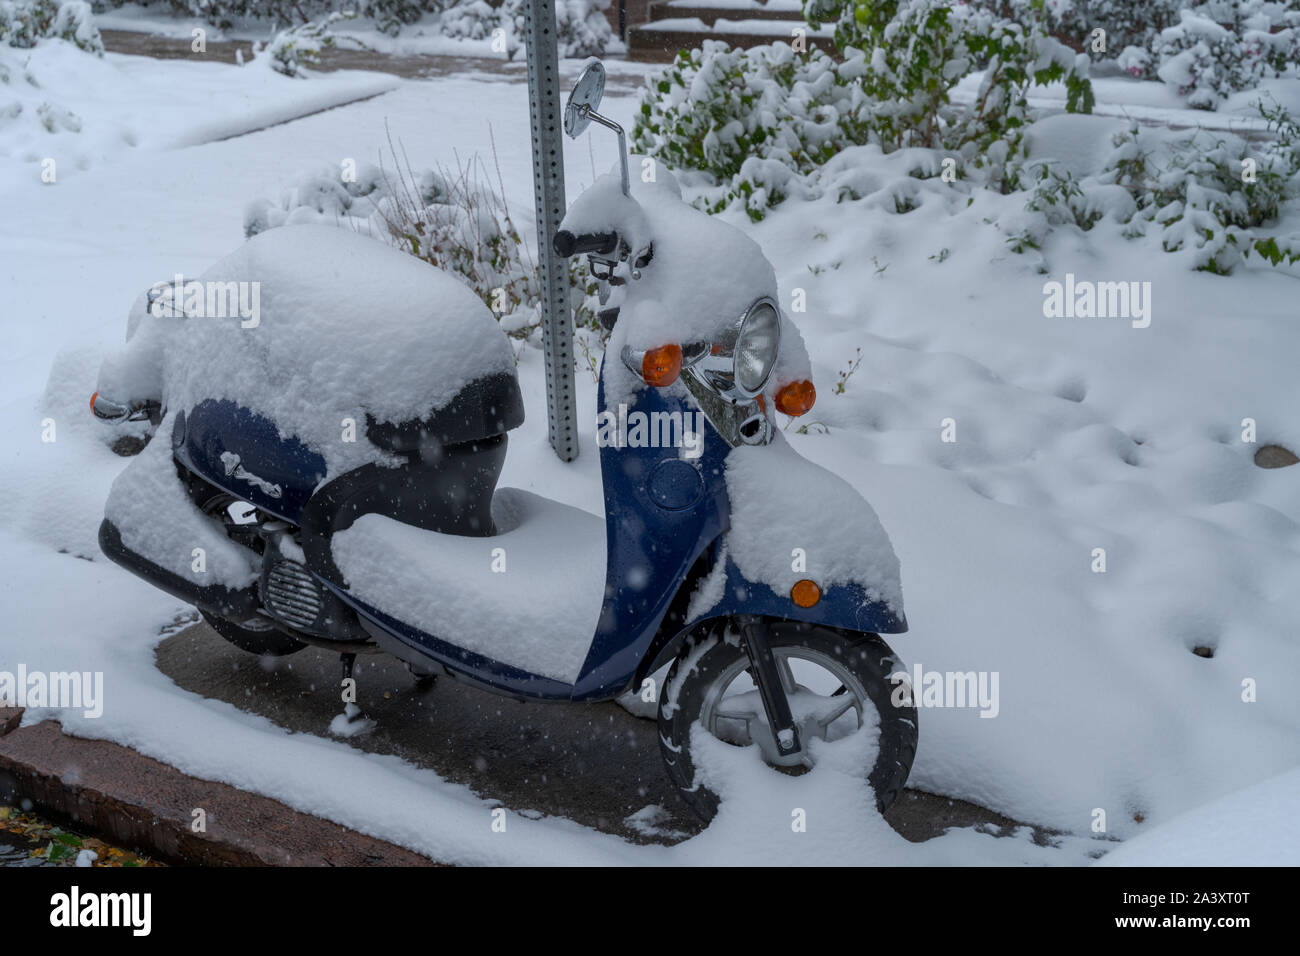 Denver, Colorado, USA- October 10, 2019: Scooter covered in snow during Denver's first snow storm of the season. Stock Photo